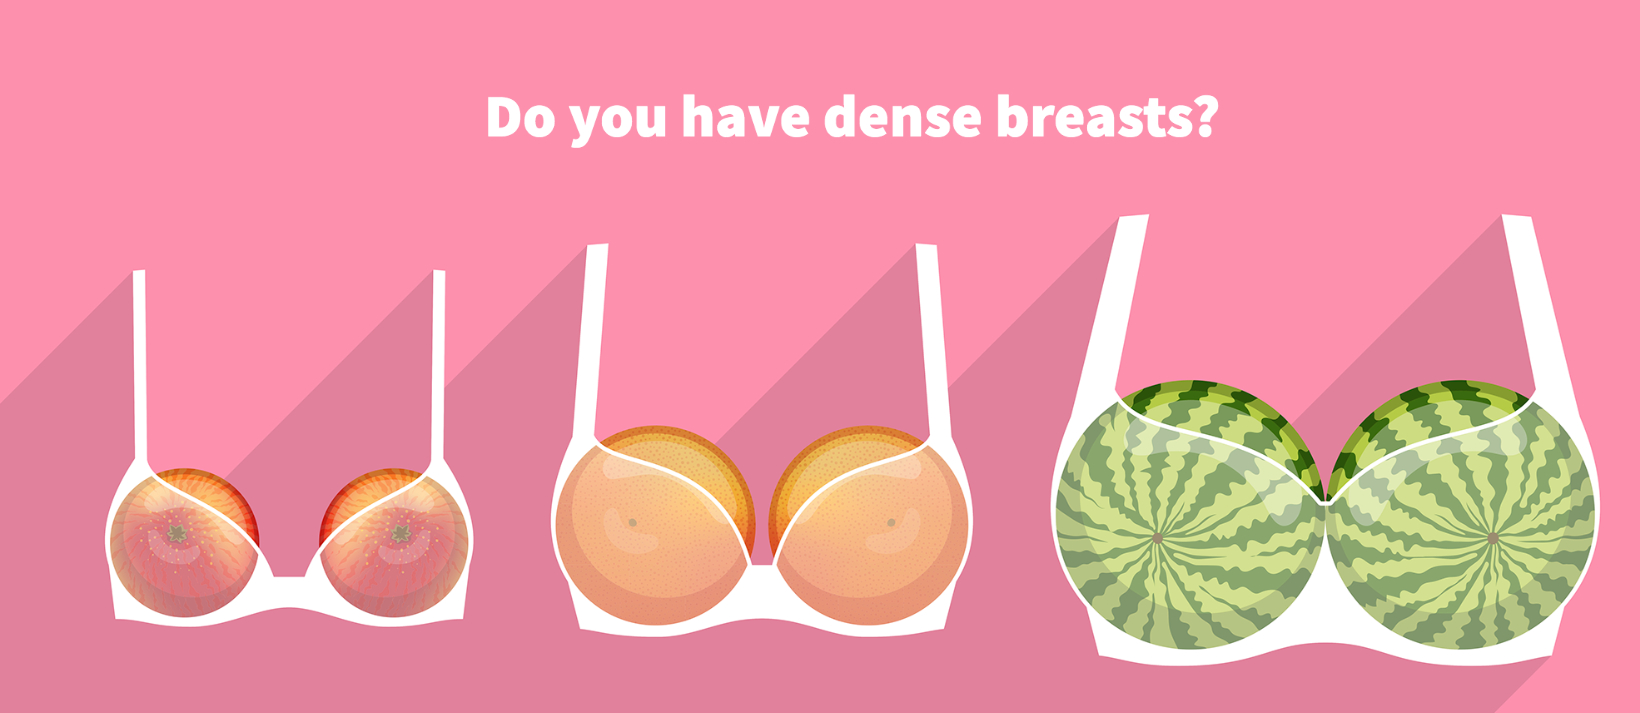 Do you have dense breasts